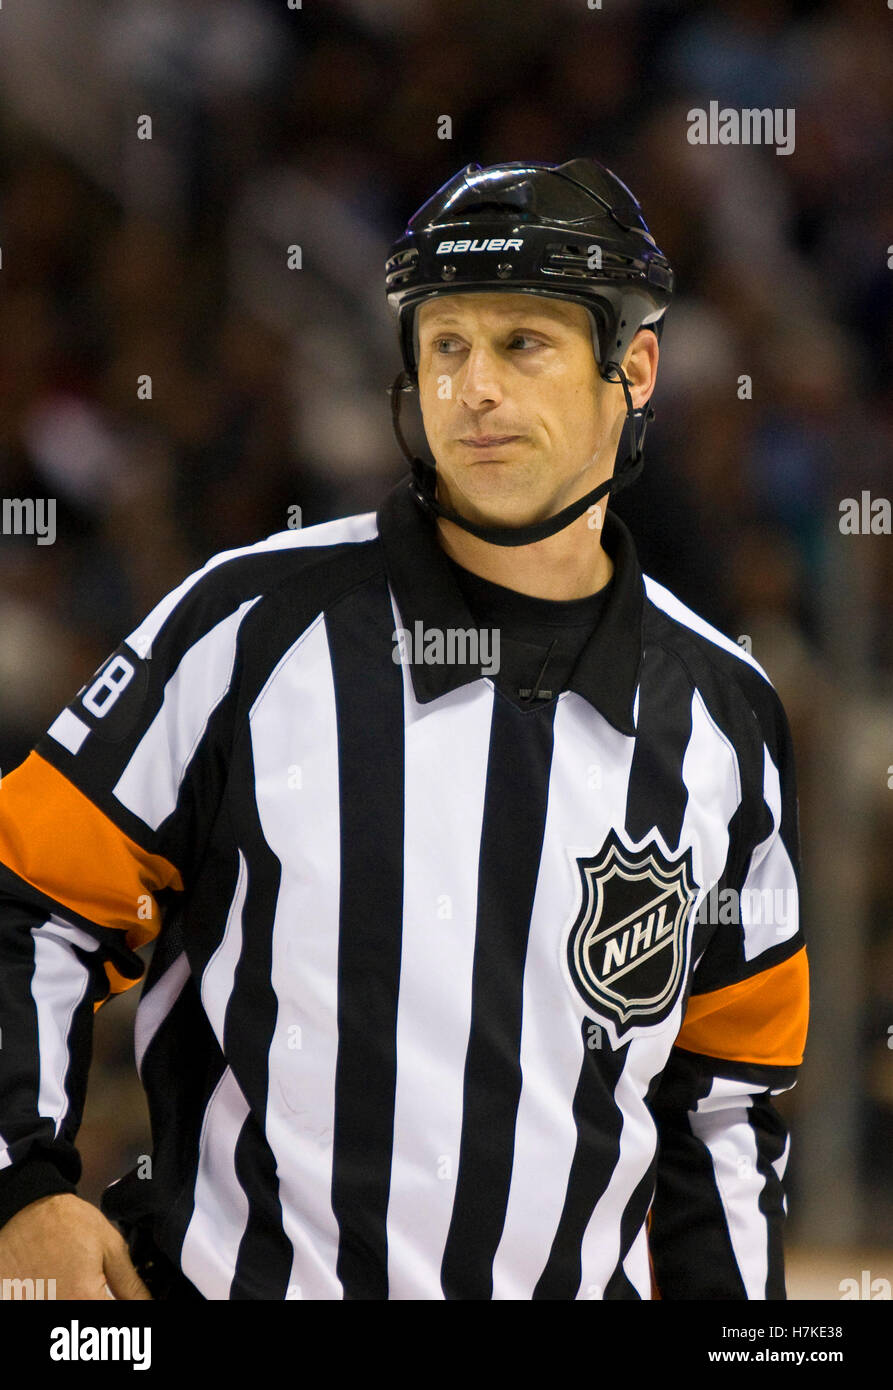 NHL referee Chris Lee during the Stock 